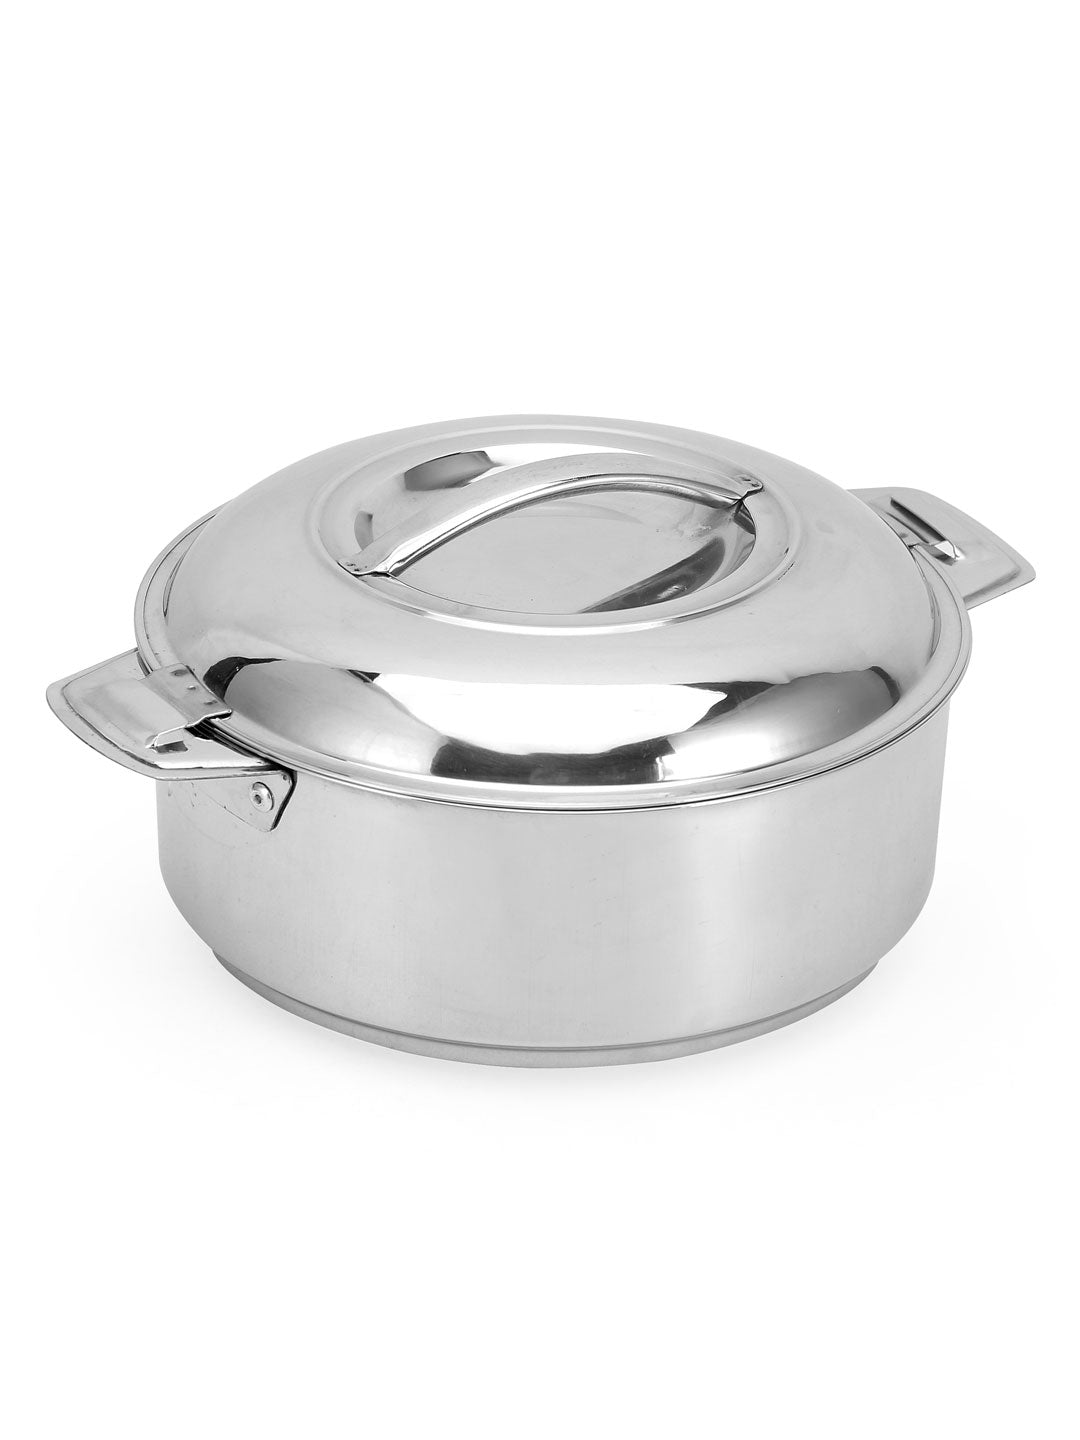 Insulated 1200 ml Casserole with Lid (Silver)